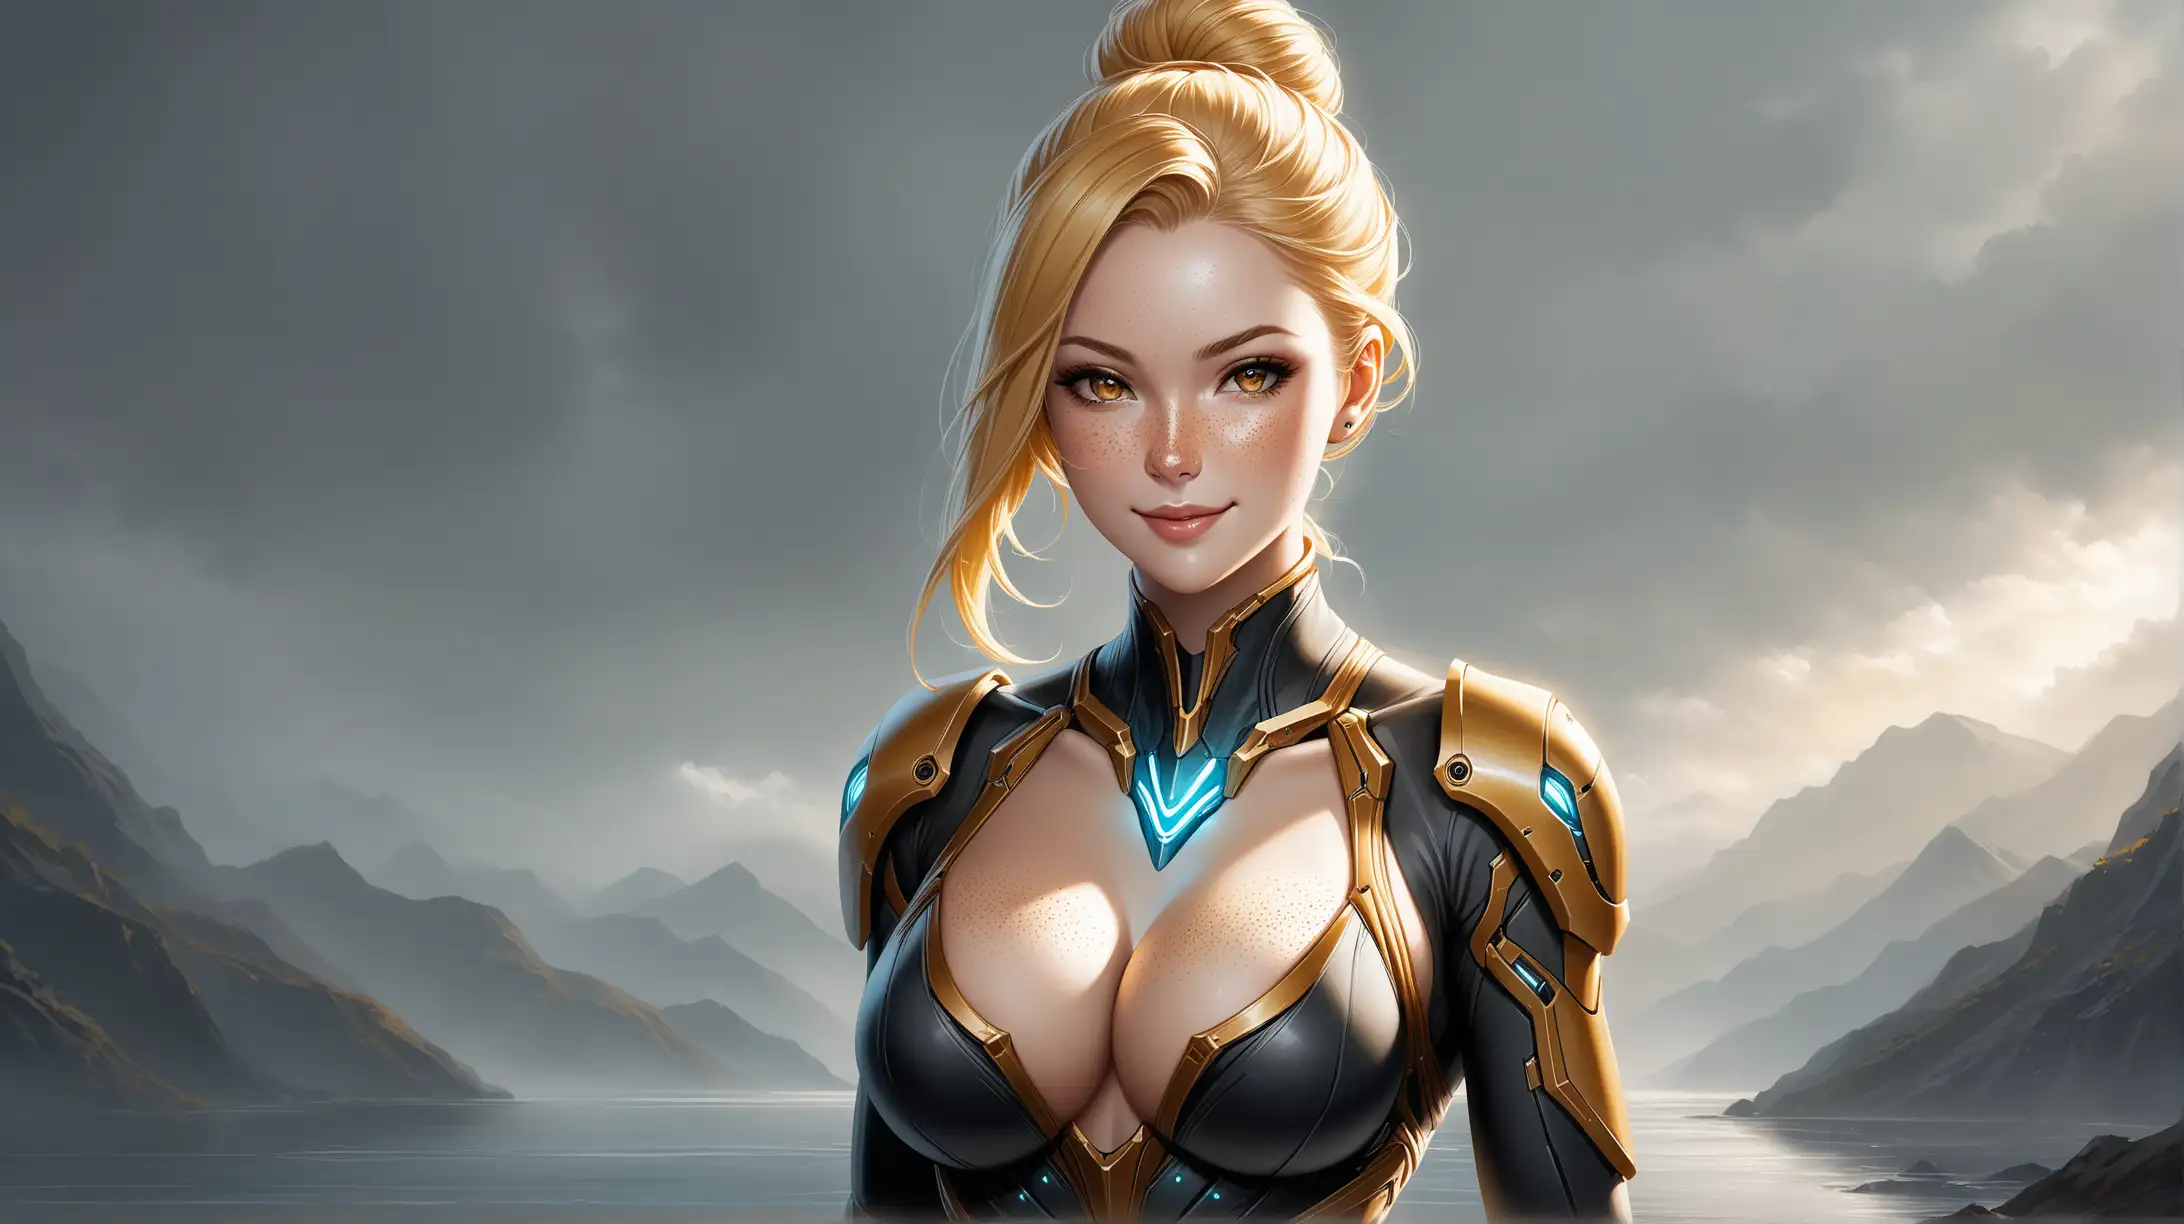 Draw a woman, long blonde hair in a bun, gold eyes, freckles, perky body, outfit inspired from Warframe, high quality, realistic, long shot, natural lighting, overcast, outdoors, seductive pose, cleavage, smiling toward the viewer